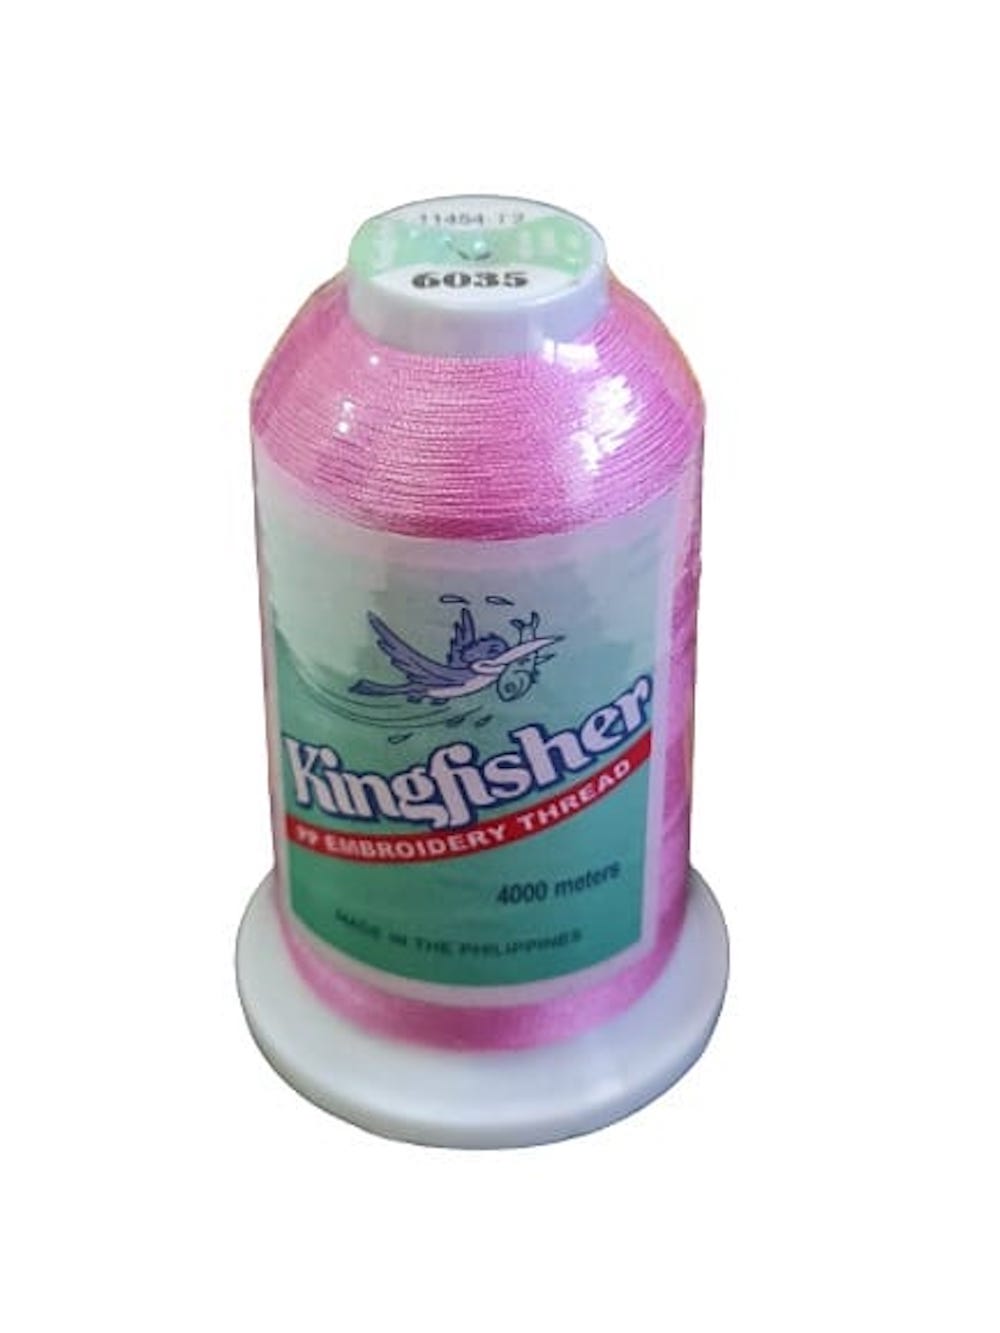 King Fisher Embroidery Thread 4000m 6035 - MY SEWING MALL